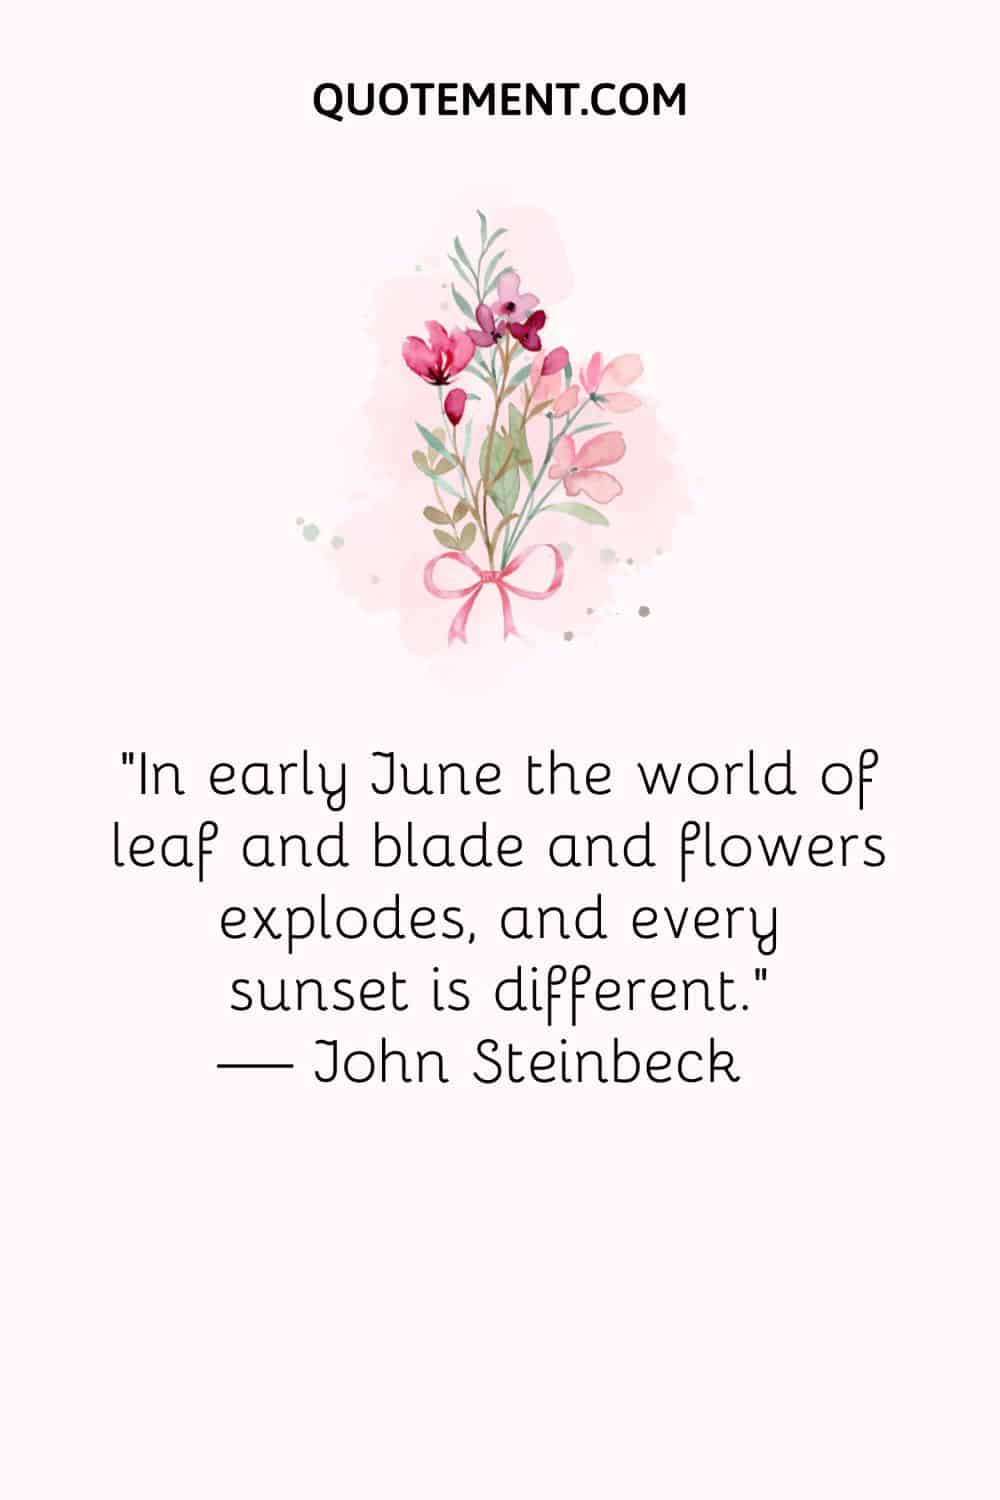 june quotes and sayings